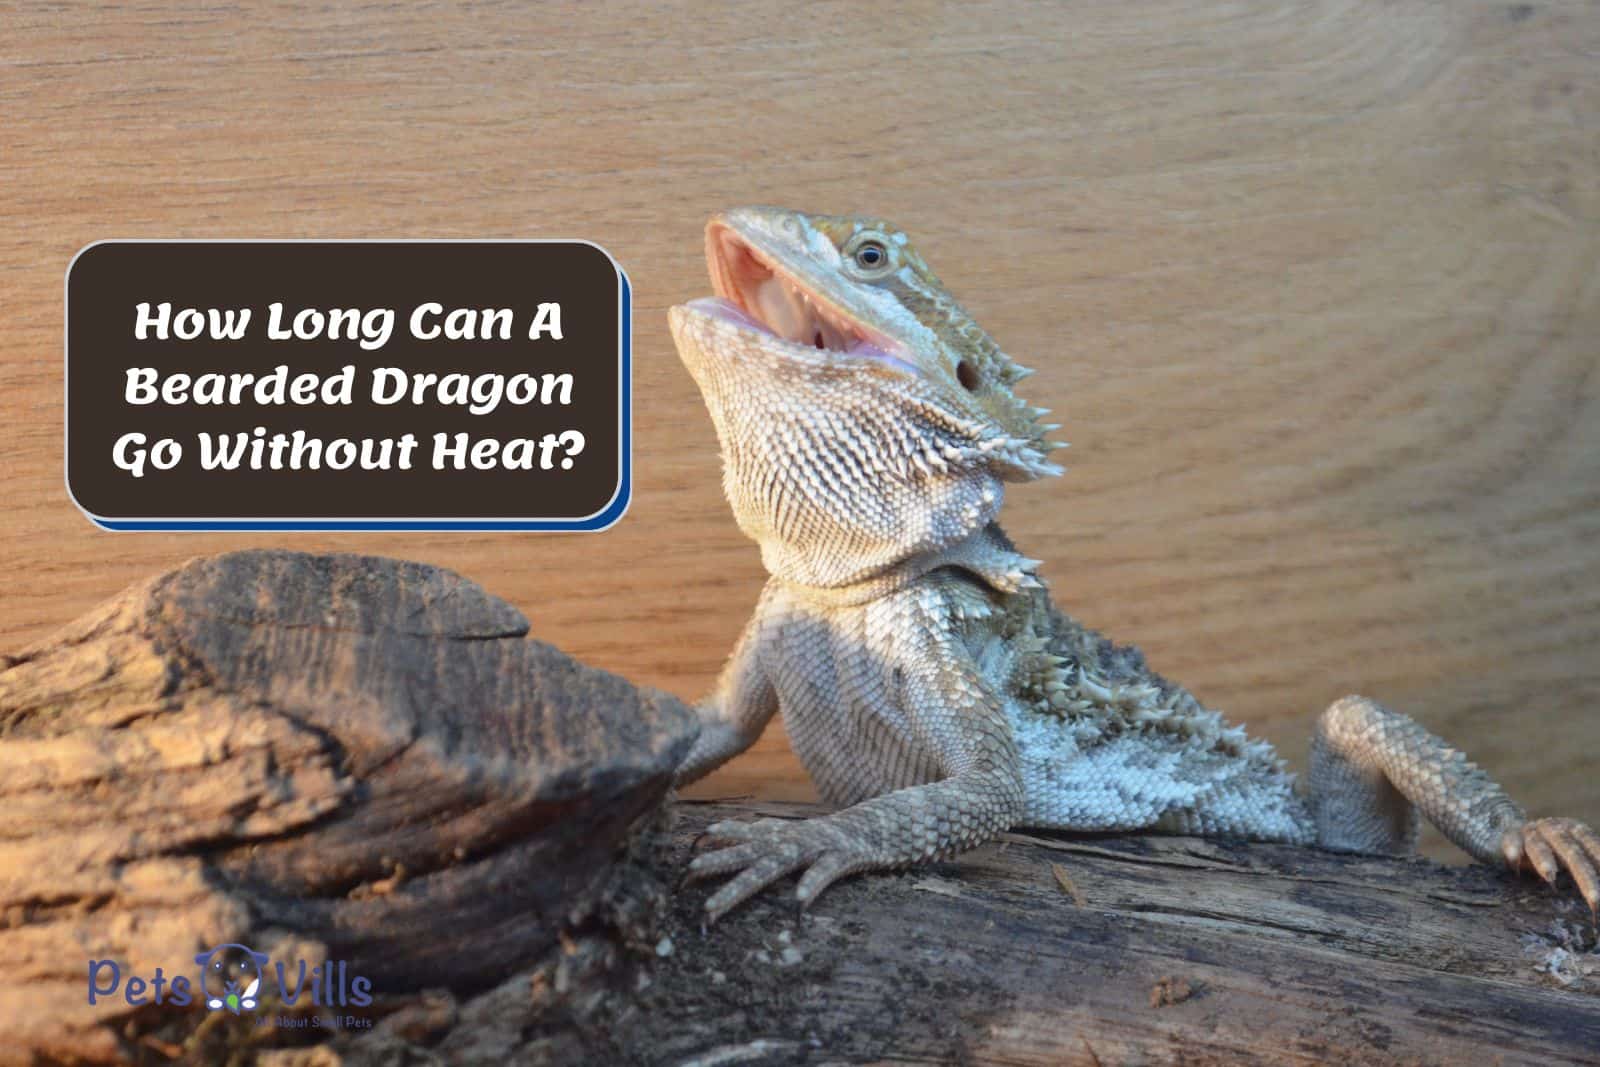 BEARDED DRAGON WITH AN OPEN MOUTH (How Long Can A Bearded Dragon Go Without Heat (1))